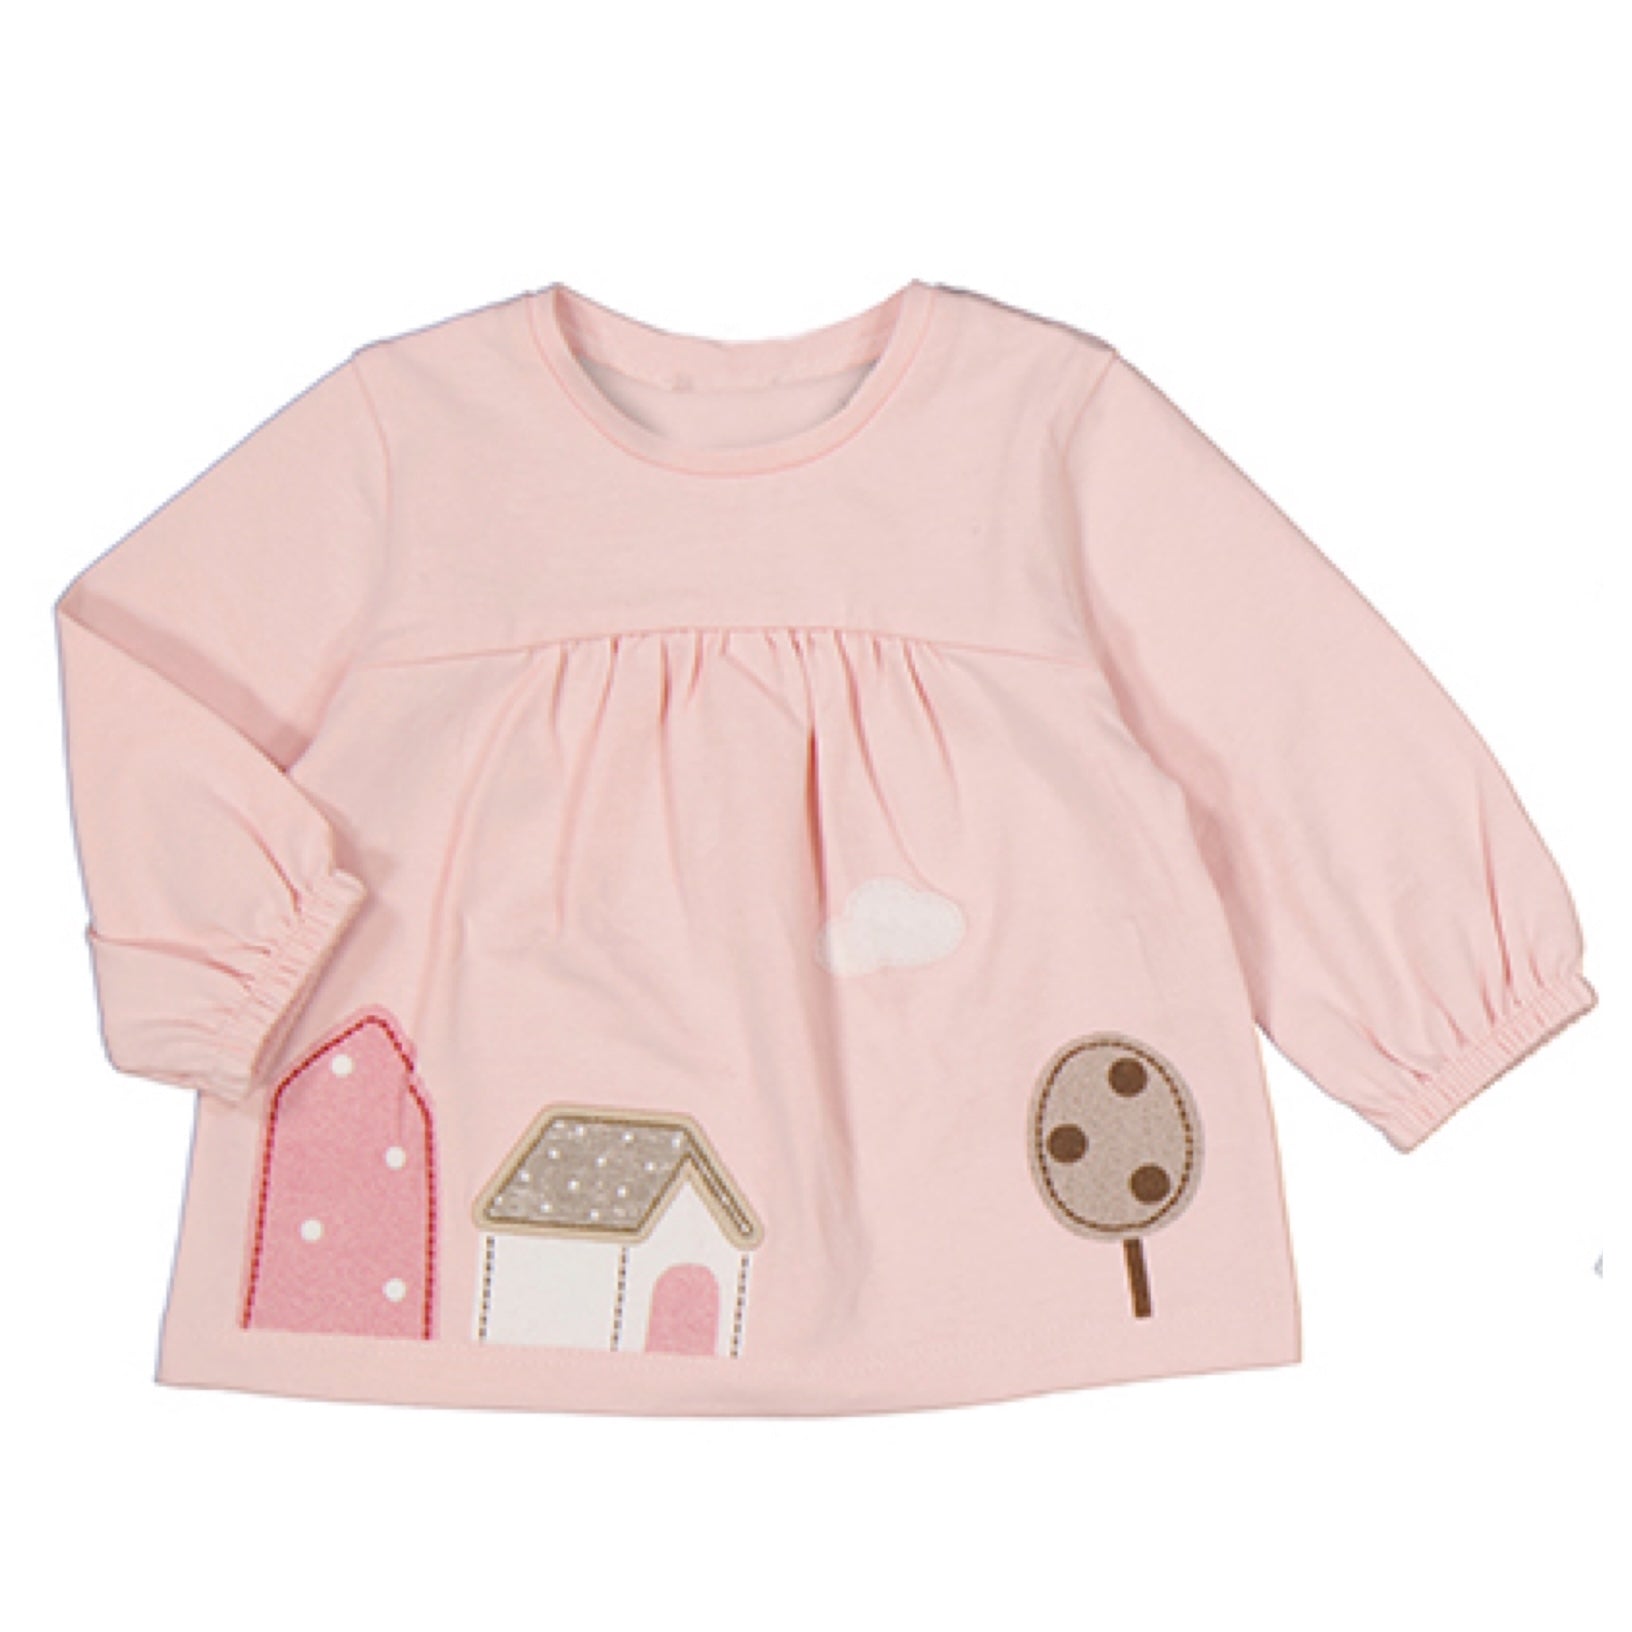 Outfit- Baby Rose House/Tan Pant NB W23-2002/2762